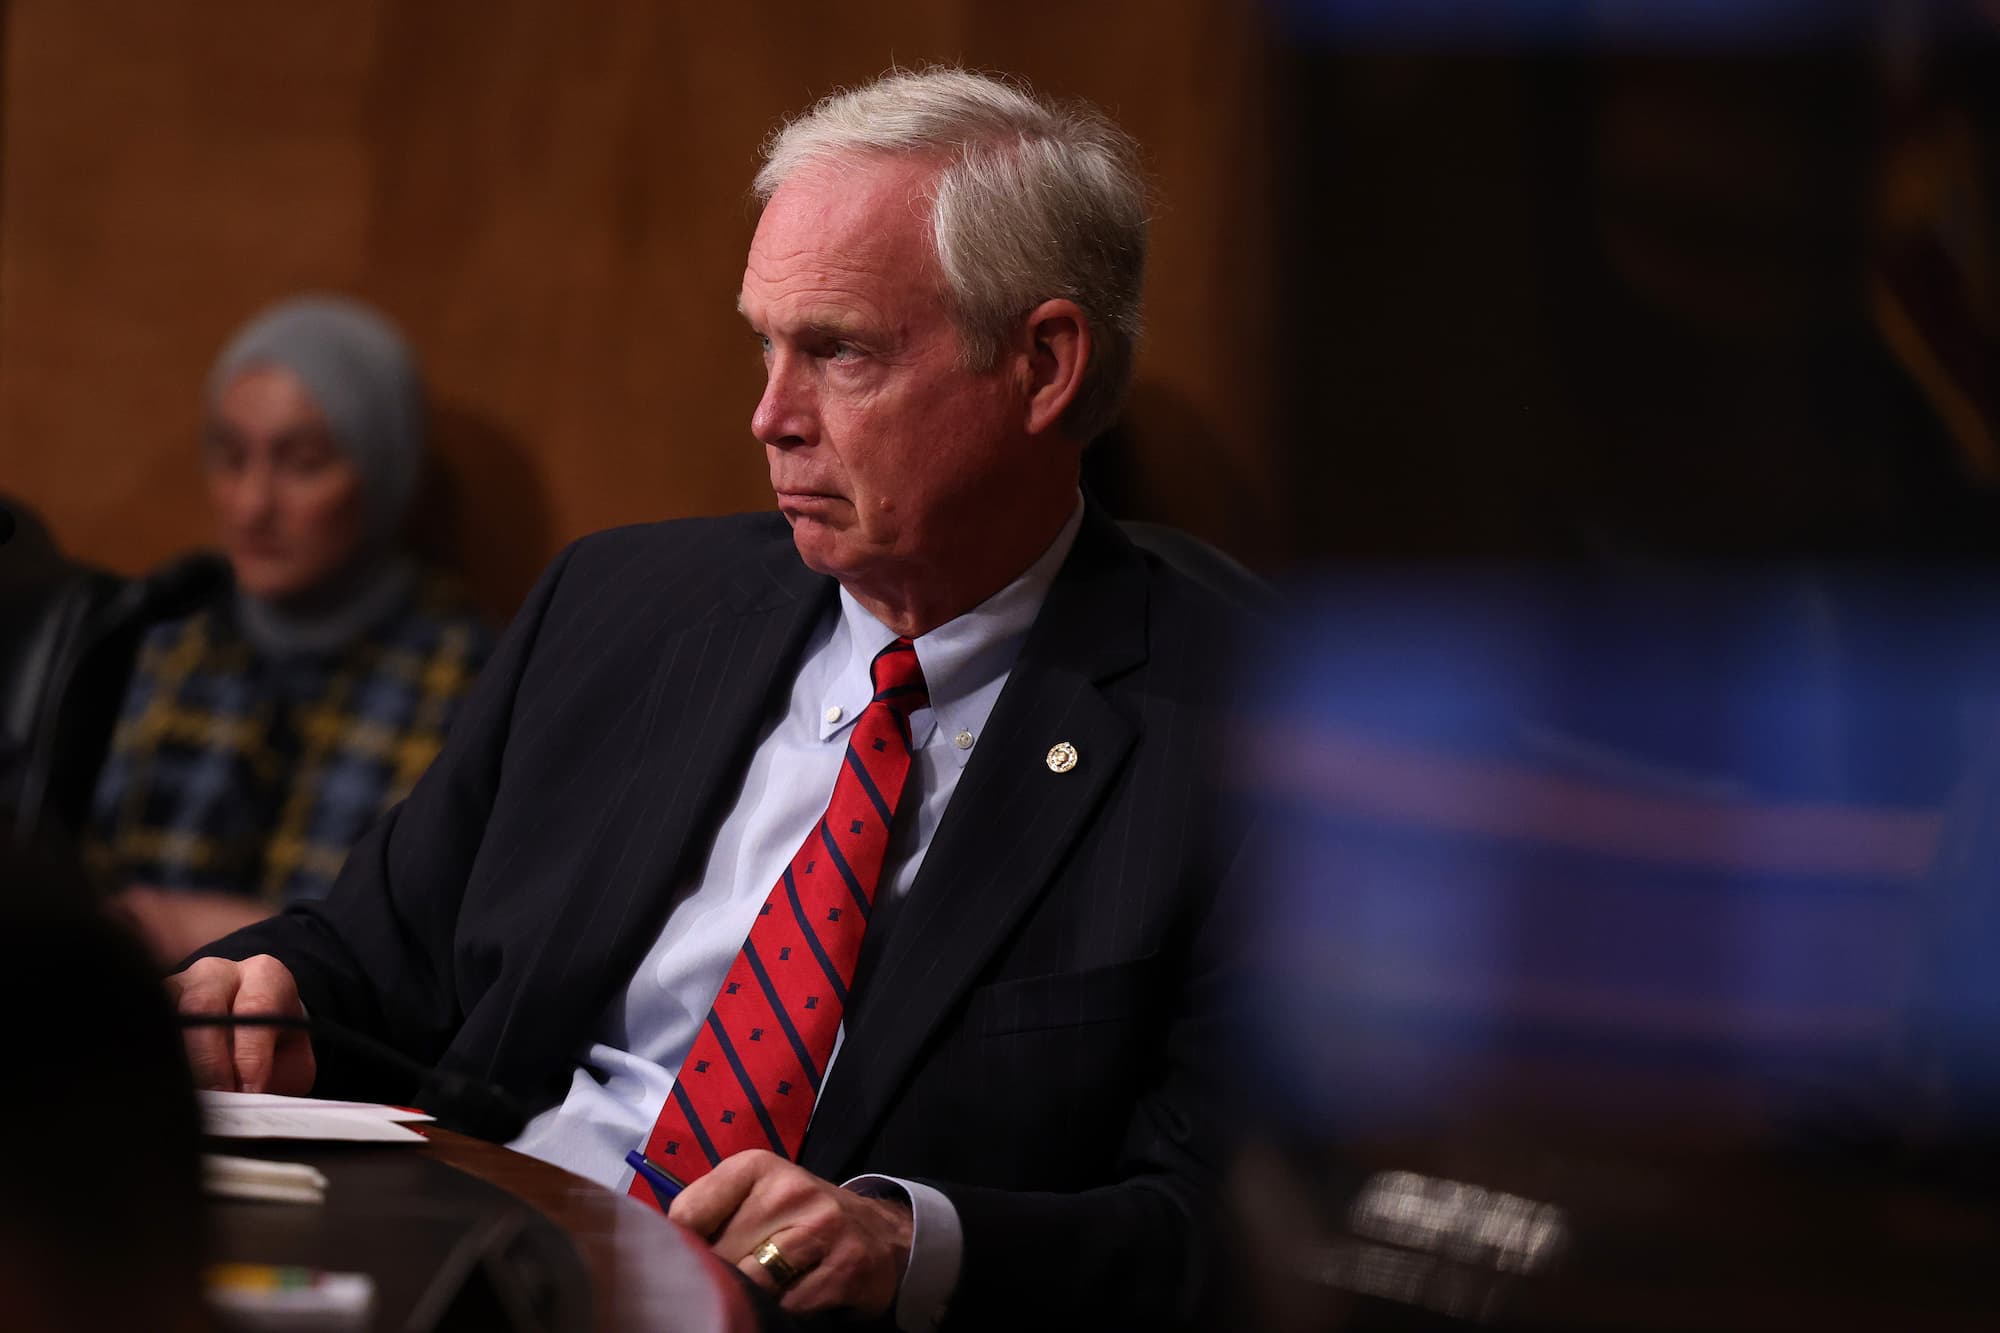 Ron Johnson frowning during hearing for DC Statehood - 6-22-21 (1)